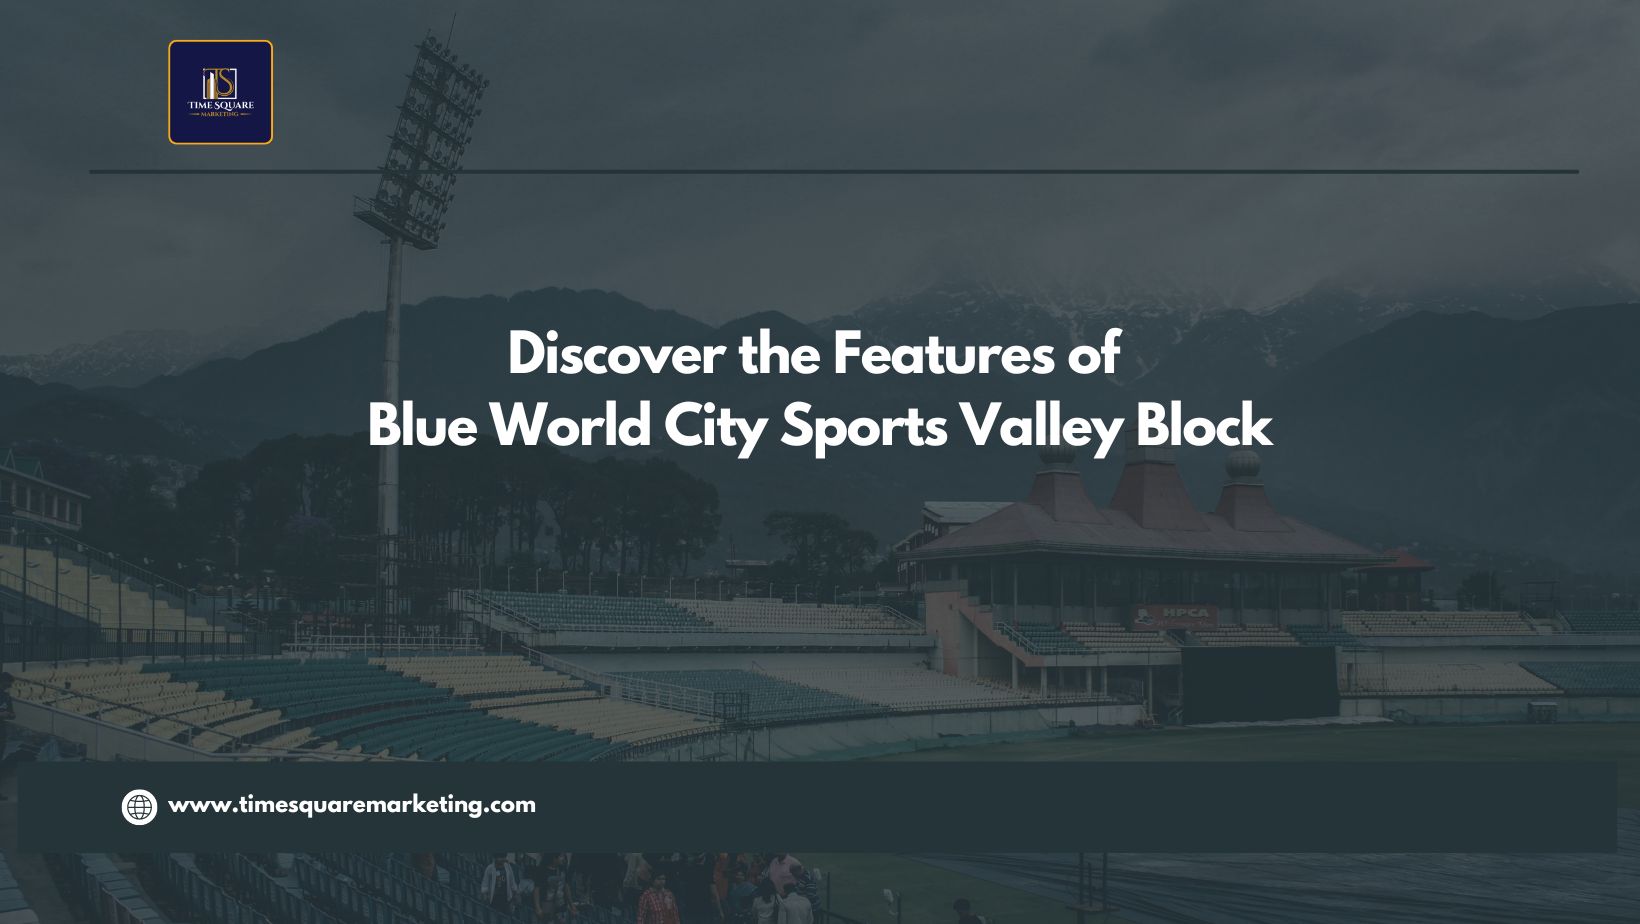 Discover the Features of Blue World City Sports Valley Block